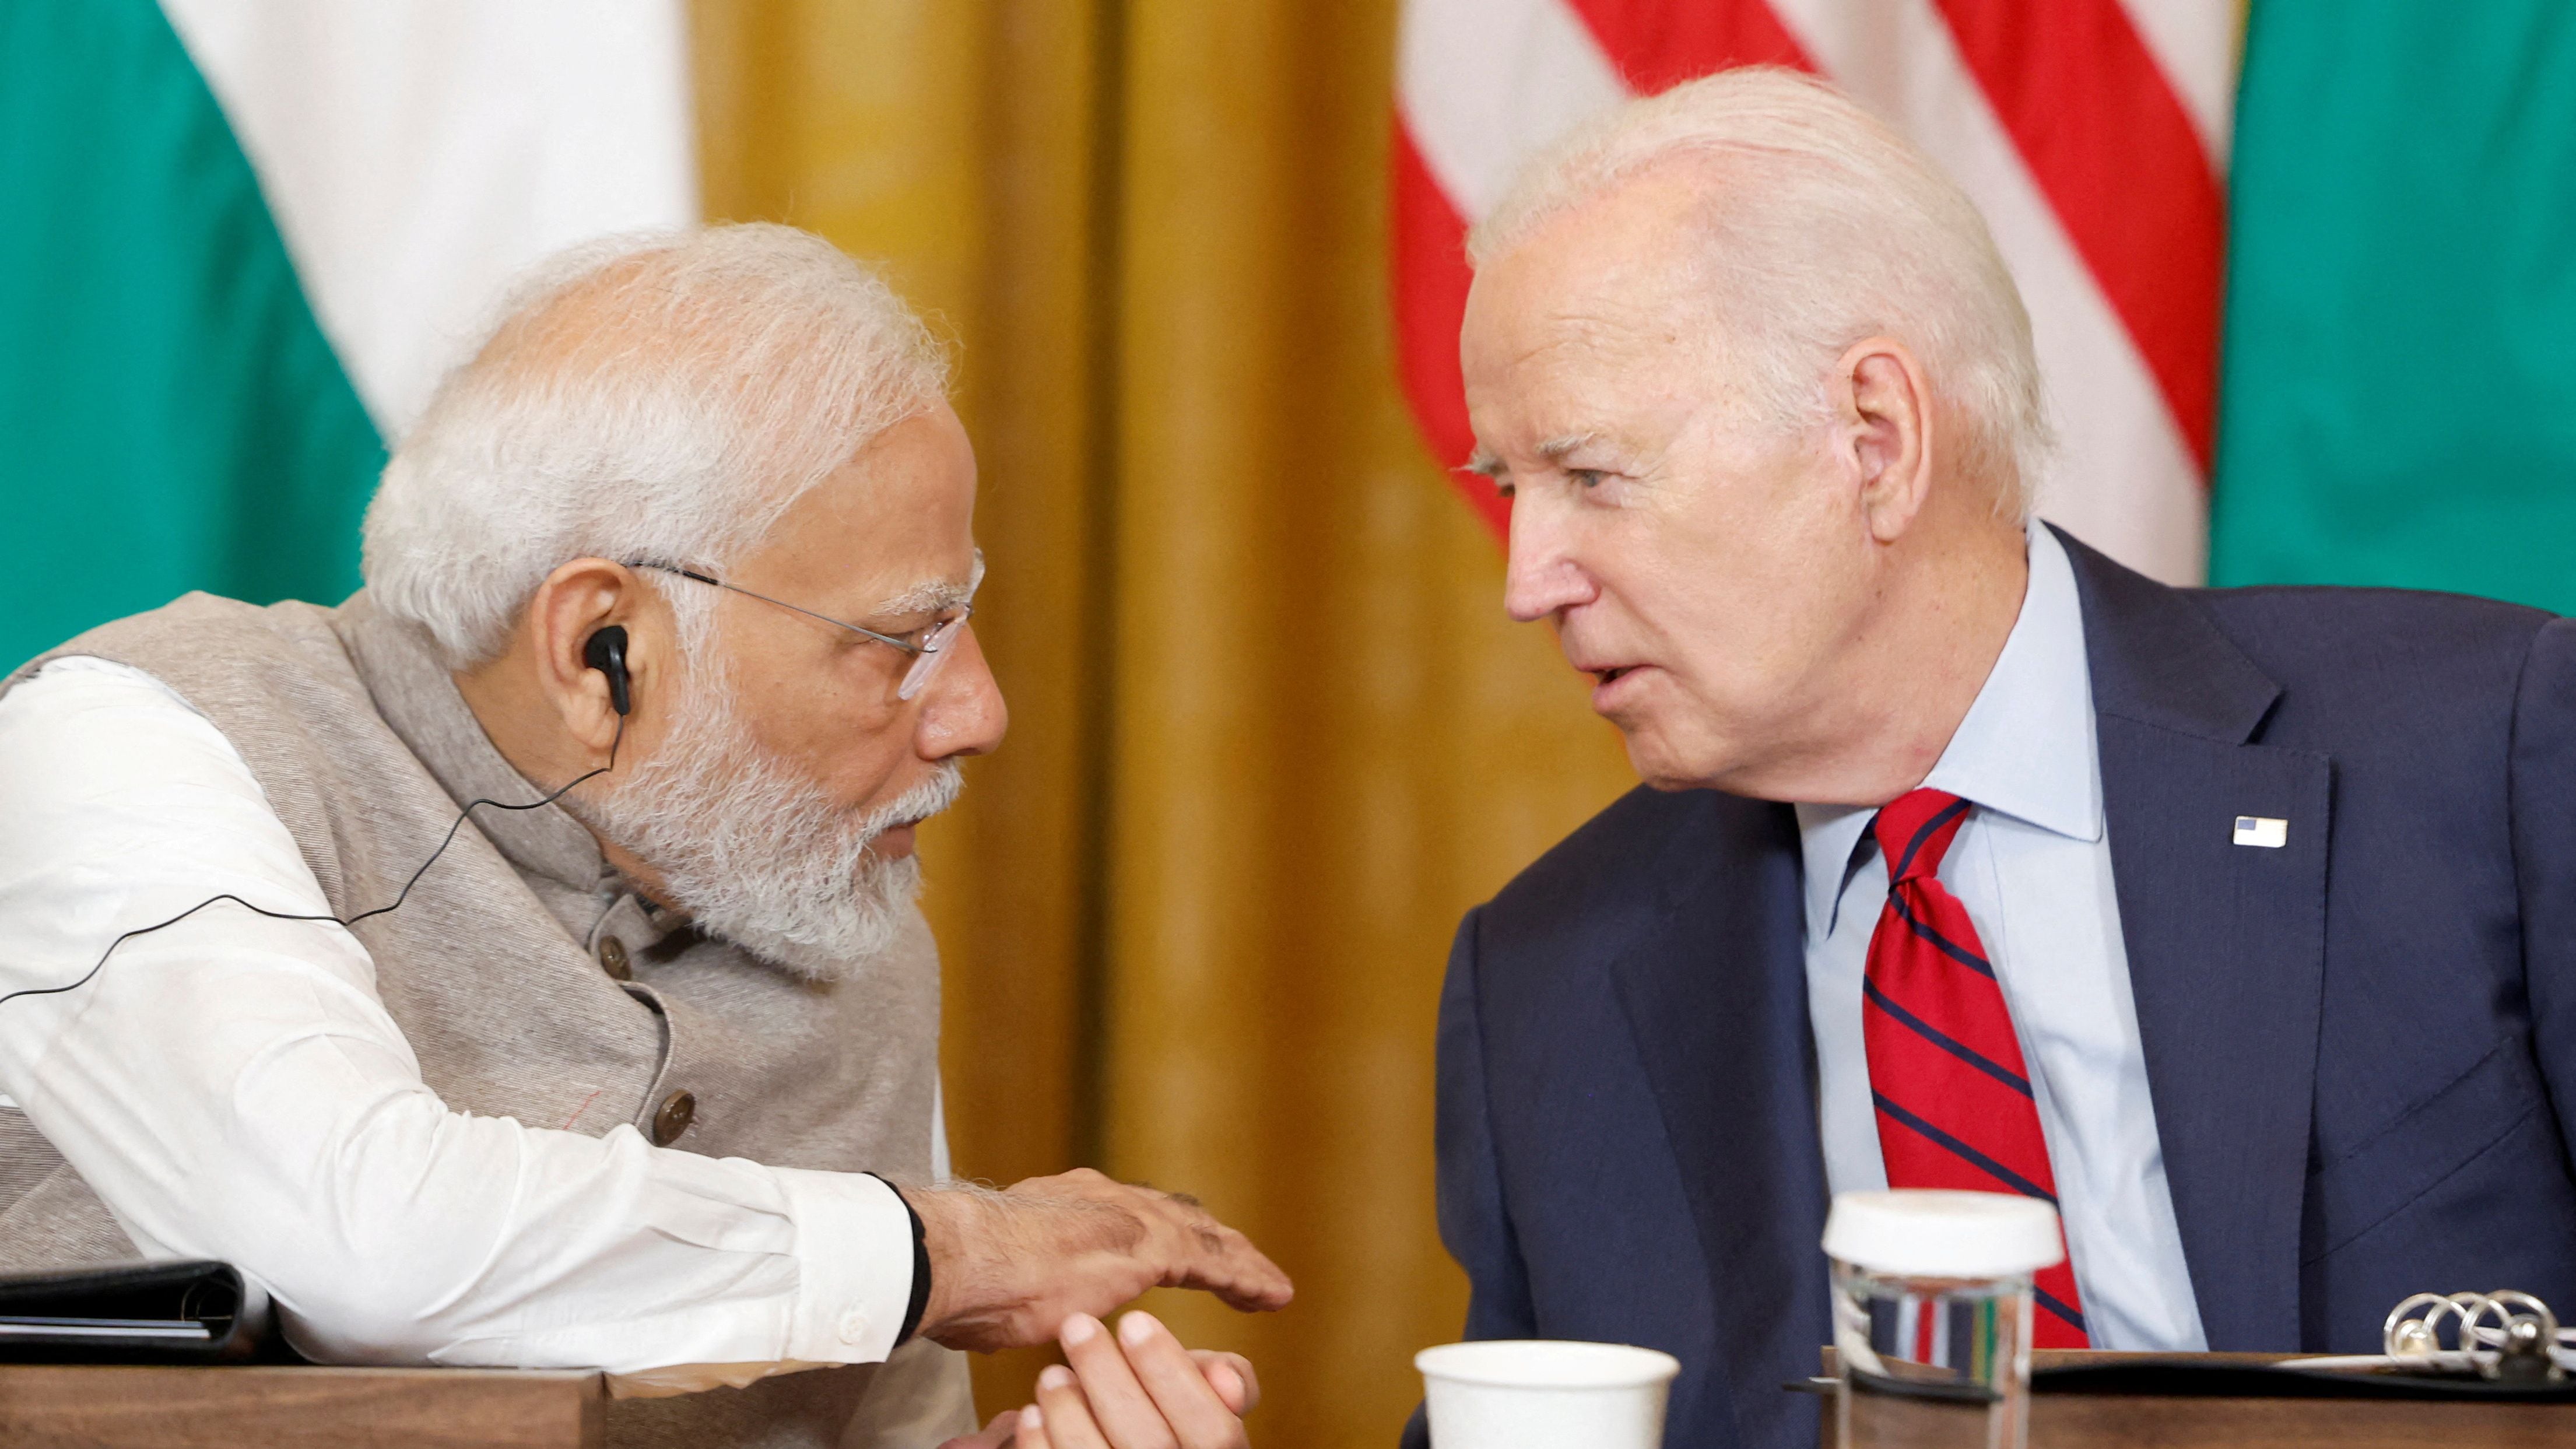 FILE PHOTO: U.S. President Joe Biden and India's Prime Minister Narendra Modi talk during a meeting with senior officials and CEOs of American and Indian companies in the East Room of the White House in Washington, U.S., June 23, 2023. REUTERS/Evelyn Hockstein/File Photo